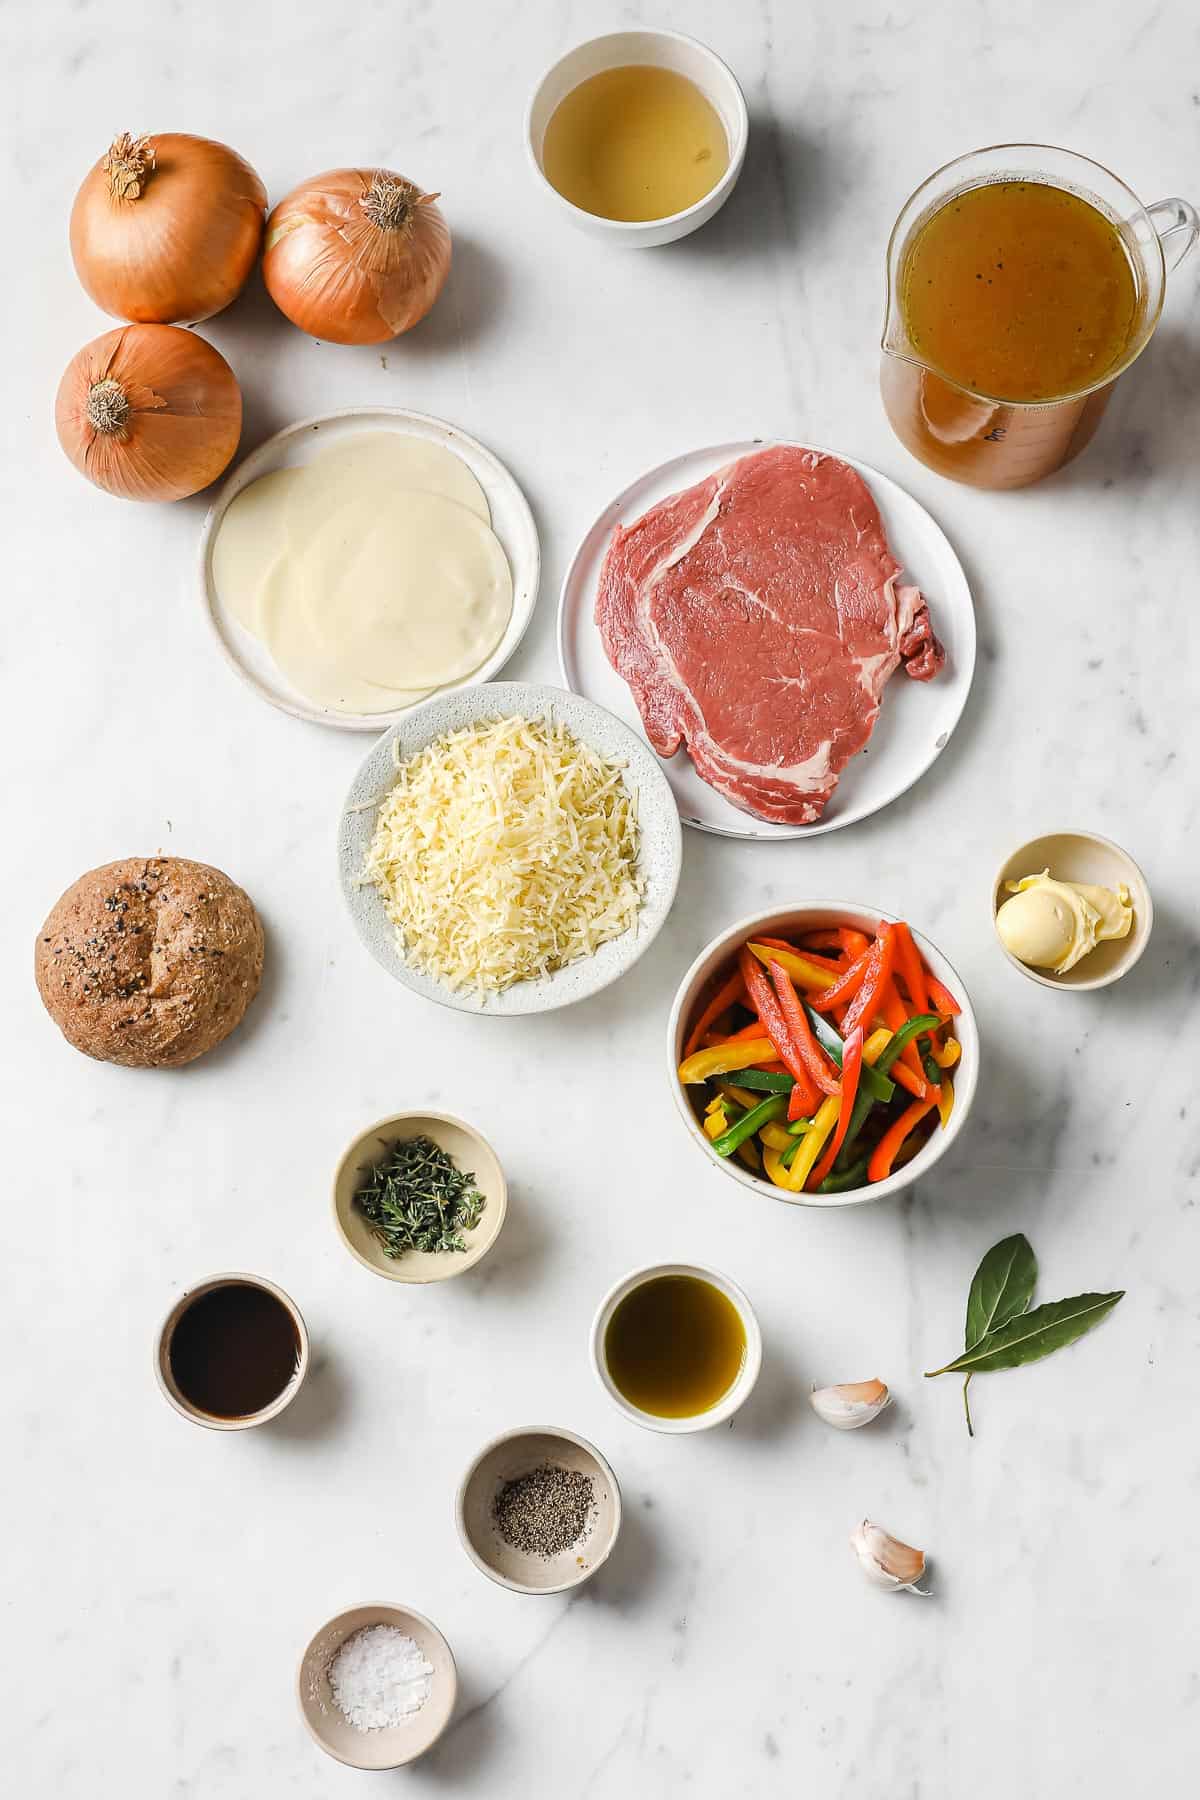 ingredients to make keto French onion soup - ribeye, onion, peppers, garlic, cheese, broth, herbs, spices and bread